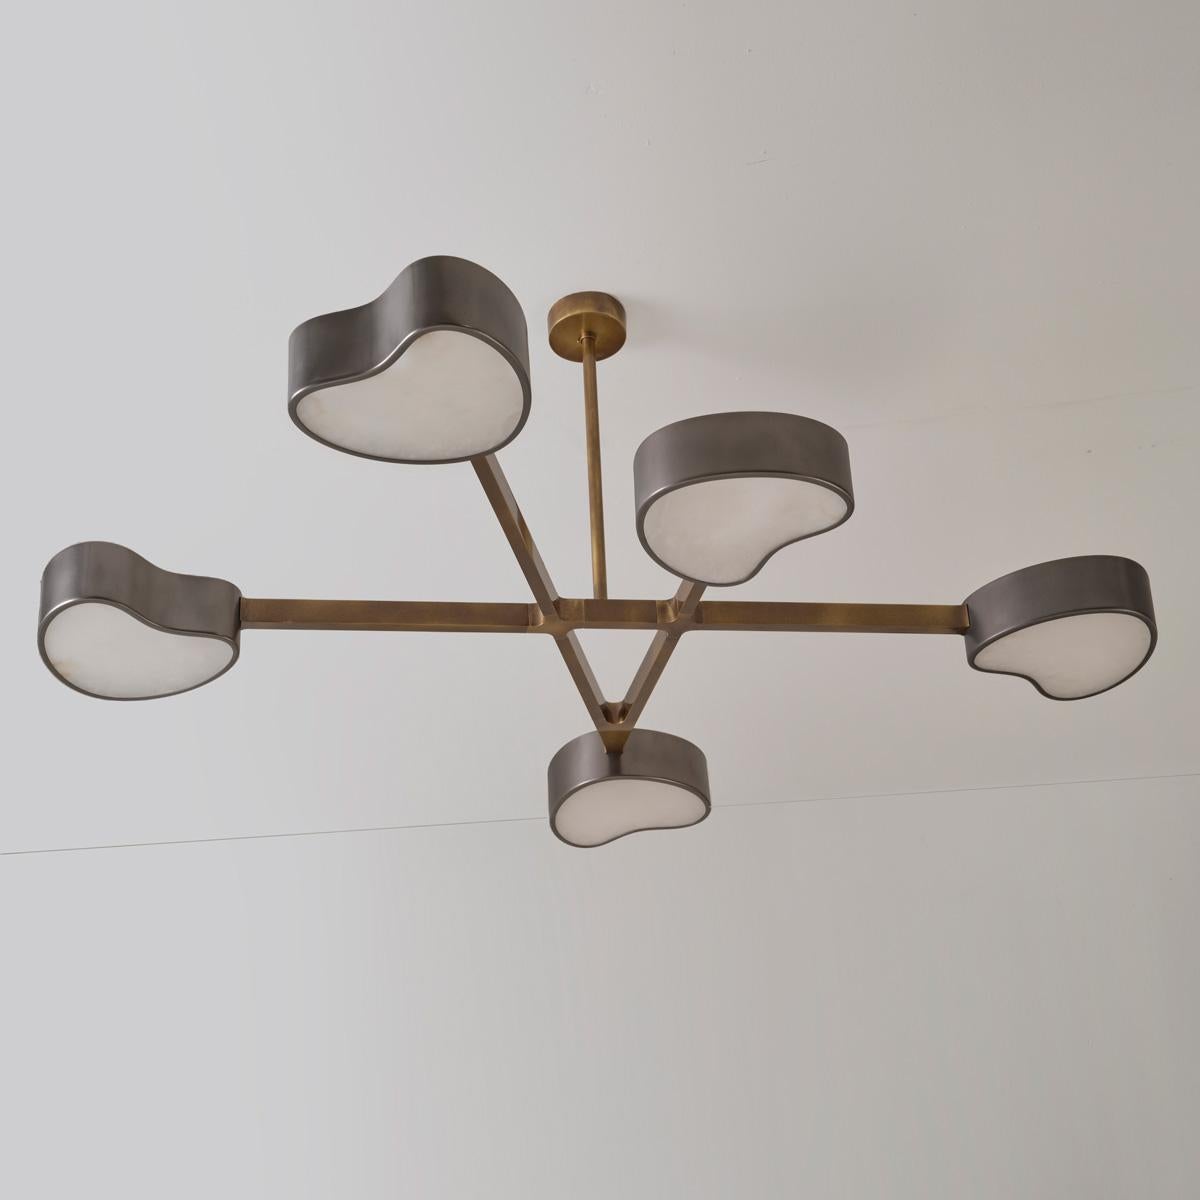 Contemporary Cuore N.5 Ceiling Light by Gaspare Asaro. Satin Brass and Sand White Finish For Sale